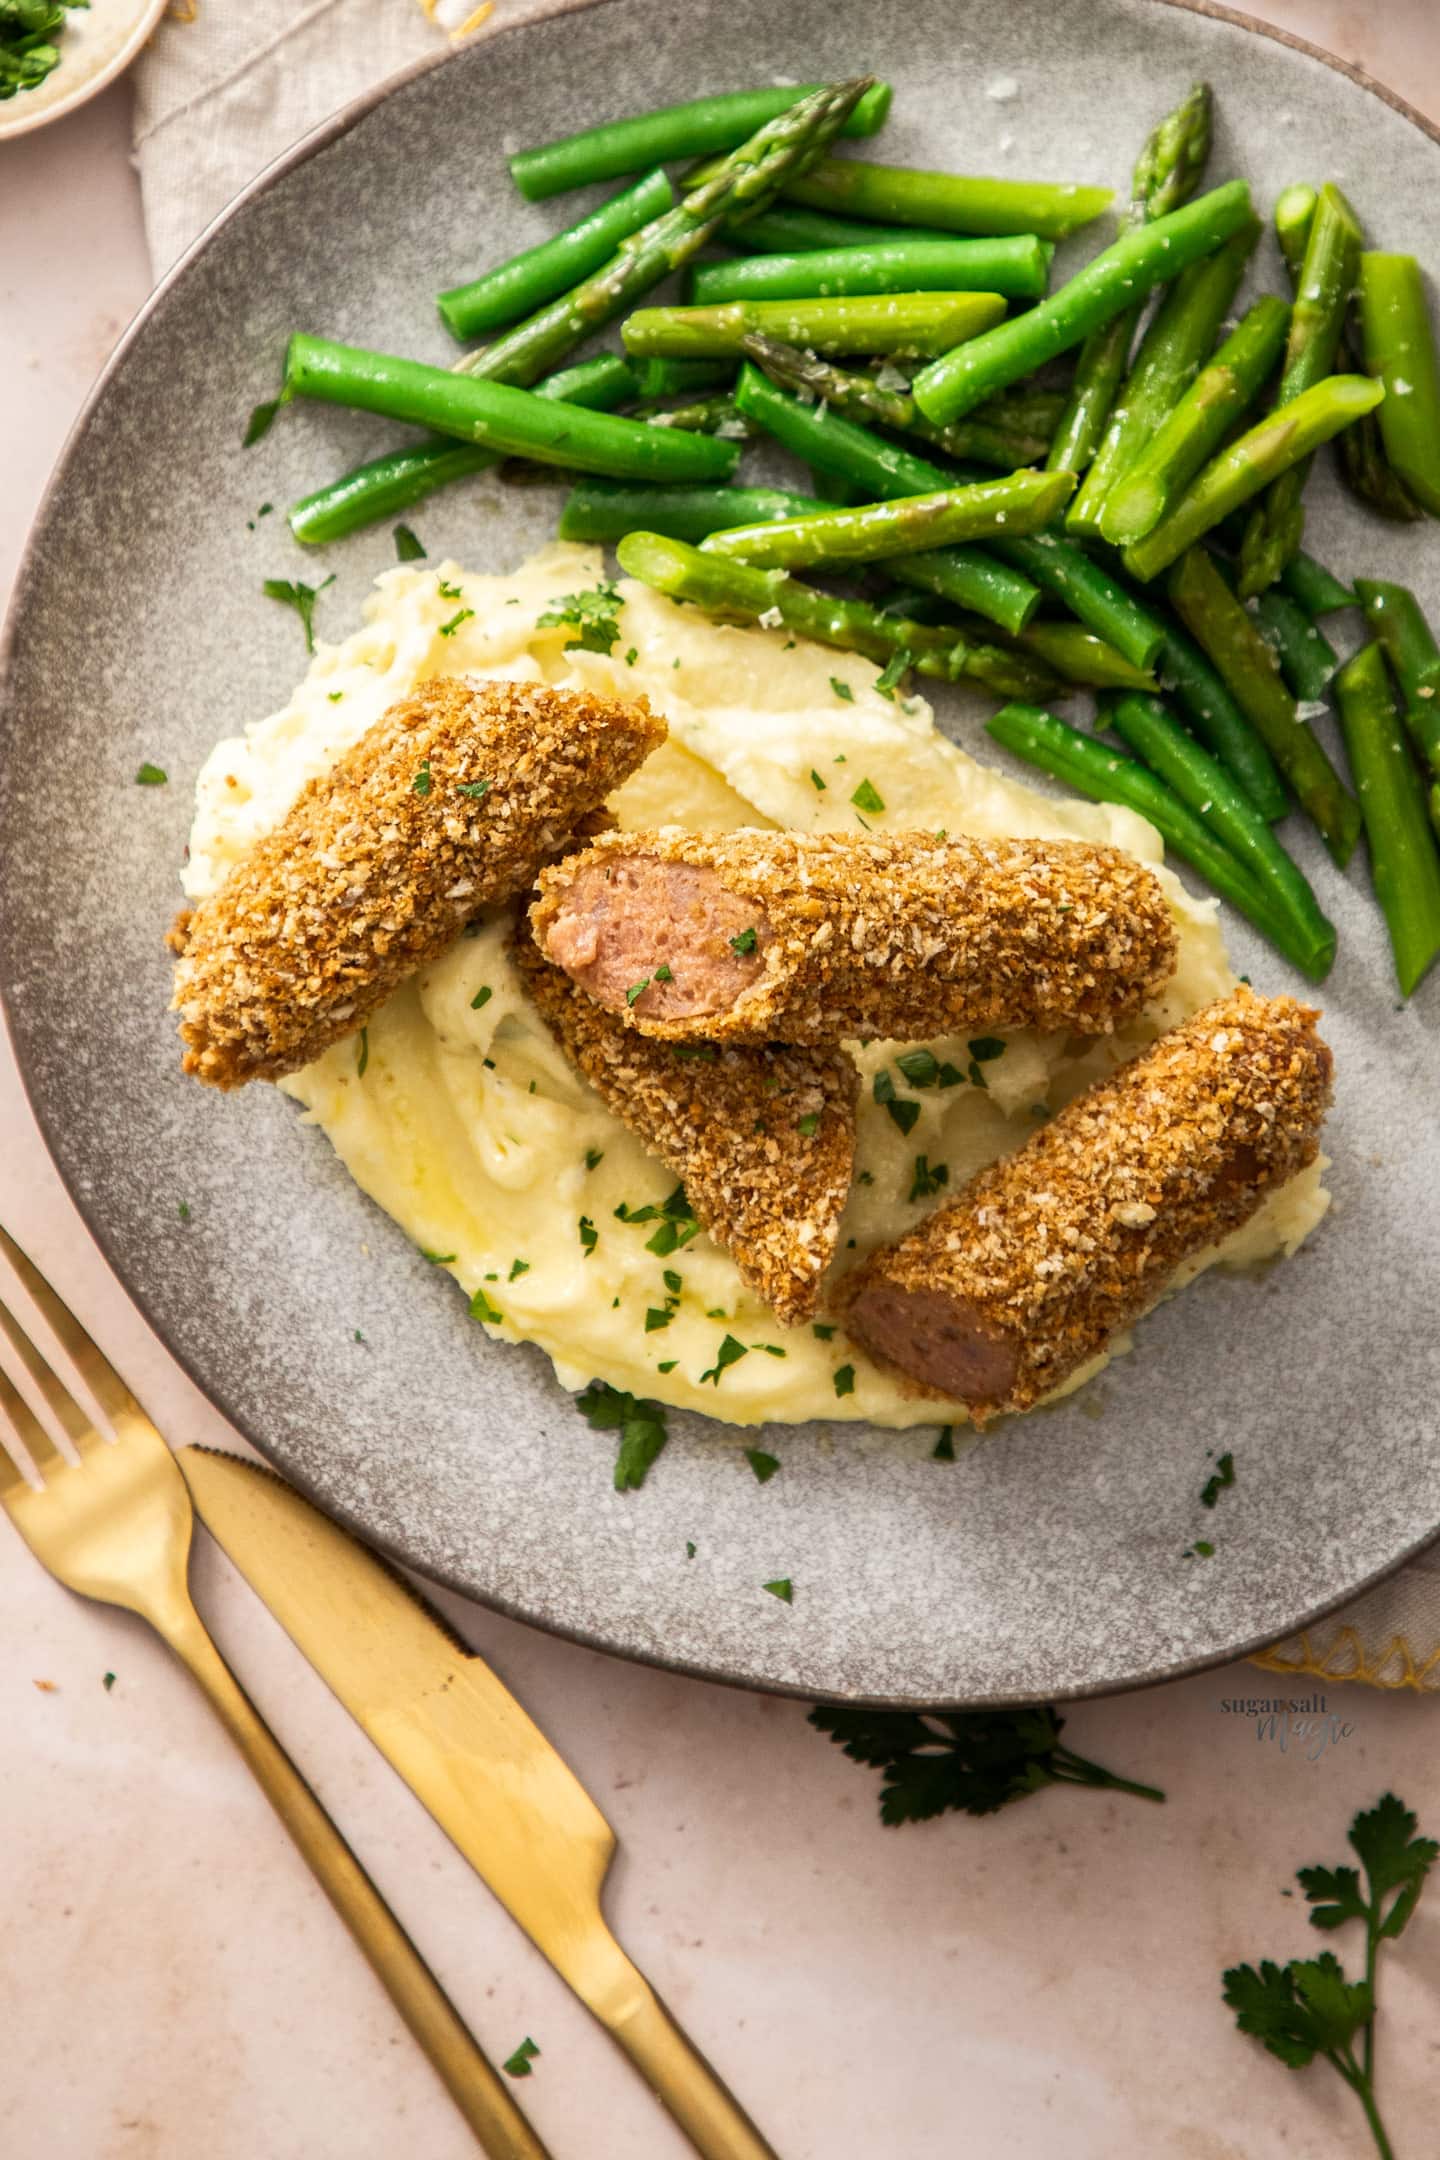 Crumbed sausages cut into pieces on a pile of mashed potato with beans to the side.